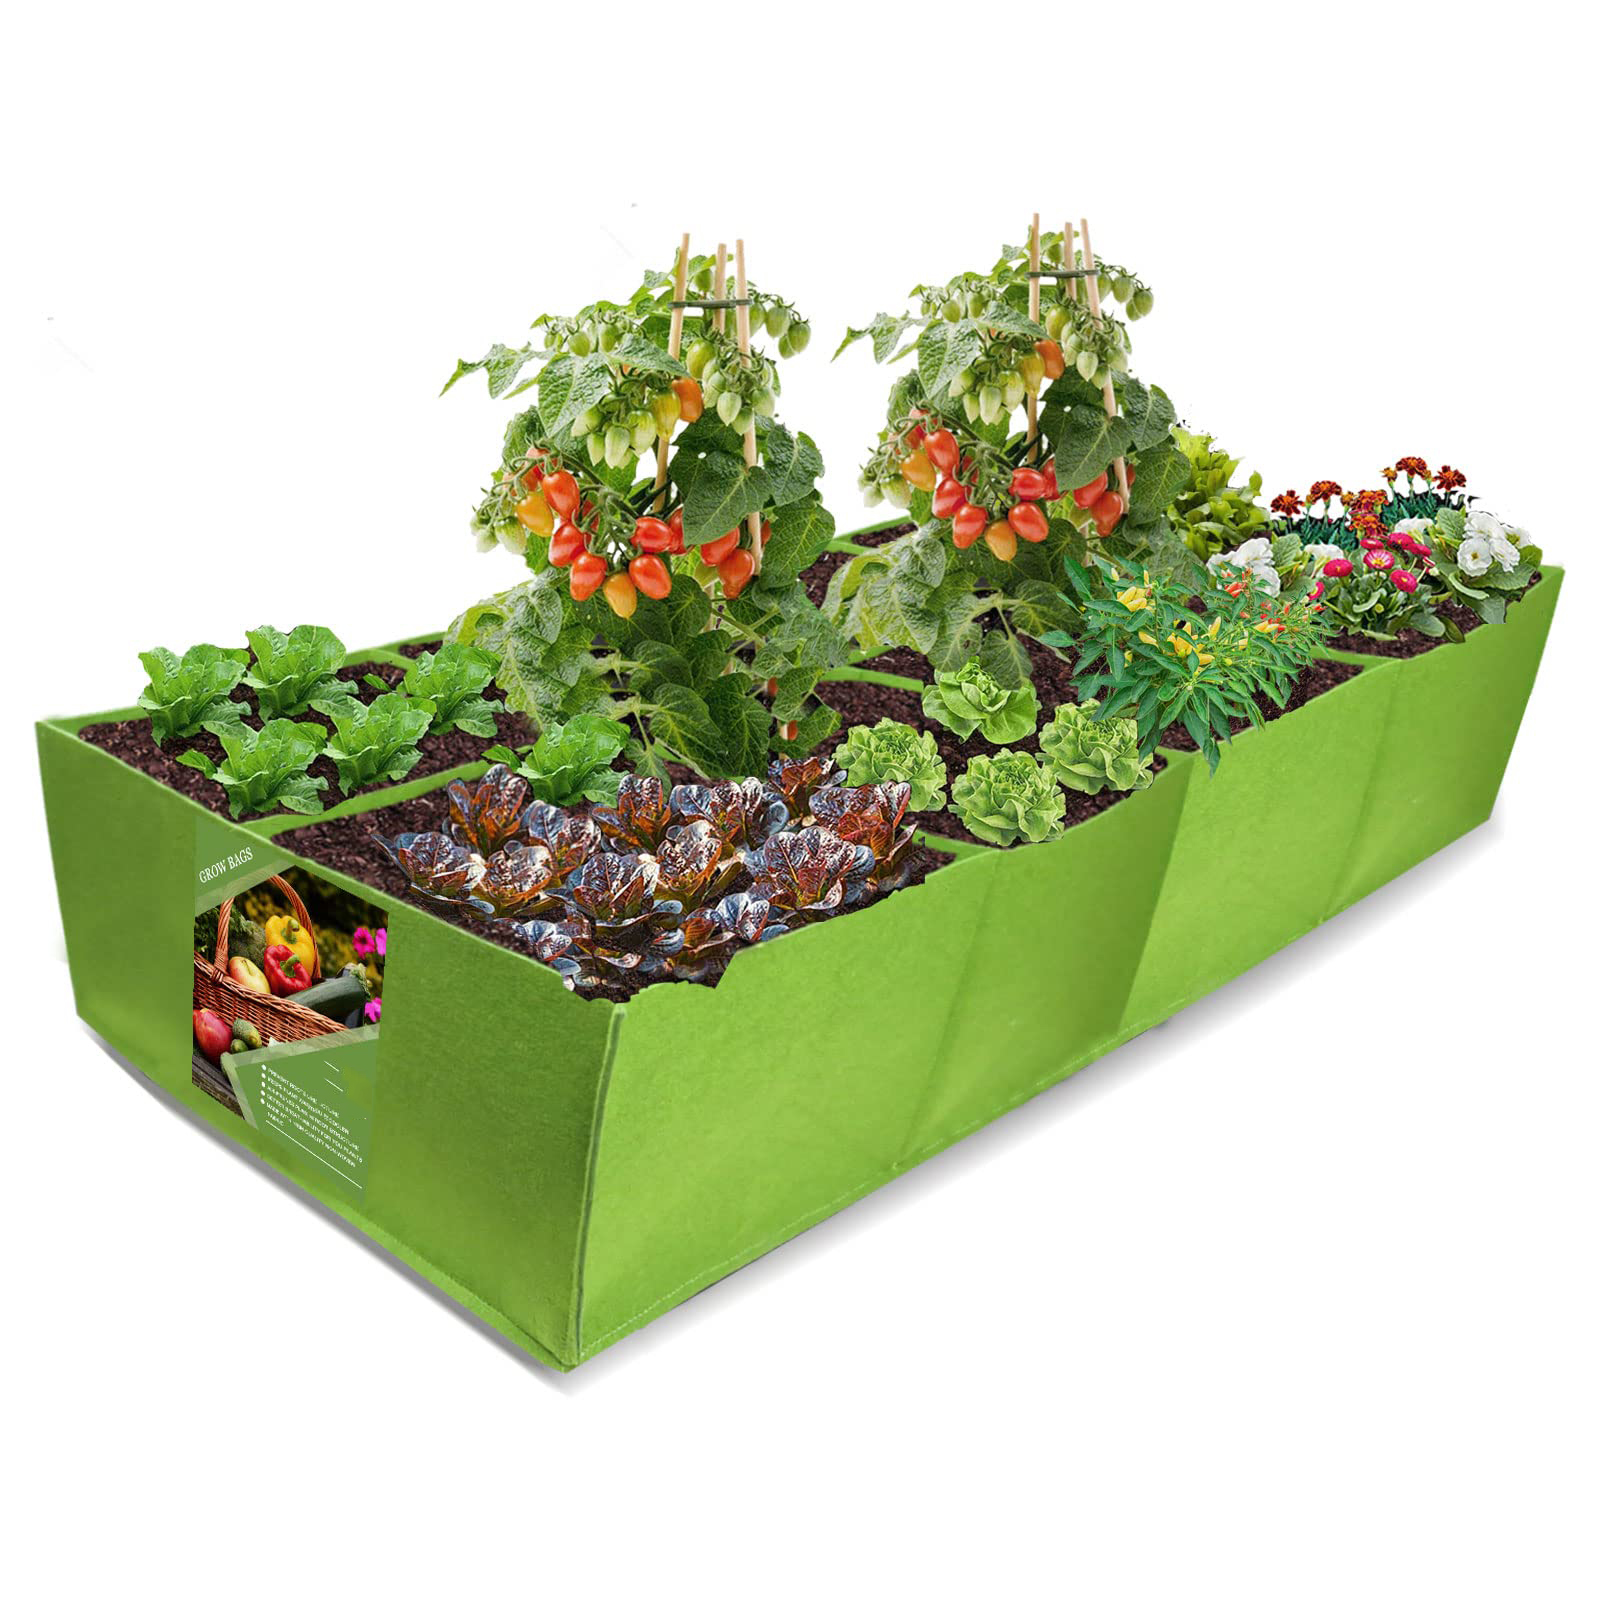 China Cheap price Felt Planting Bag Potato Planting Bag - Fabric raised garden bed square plant growth bag Large durable rectangular reusable vegetable breathing cloth container 4 mesh reusable &#...